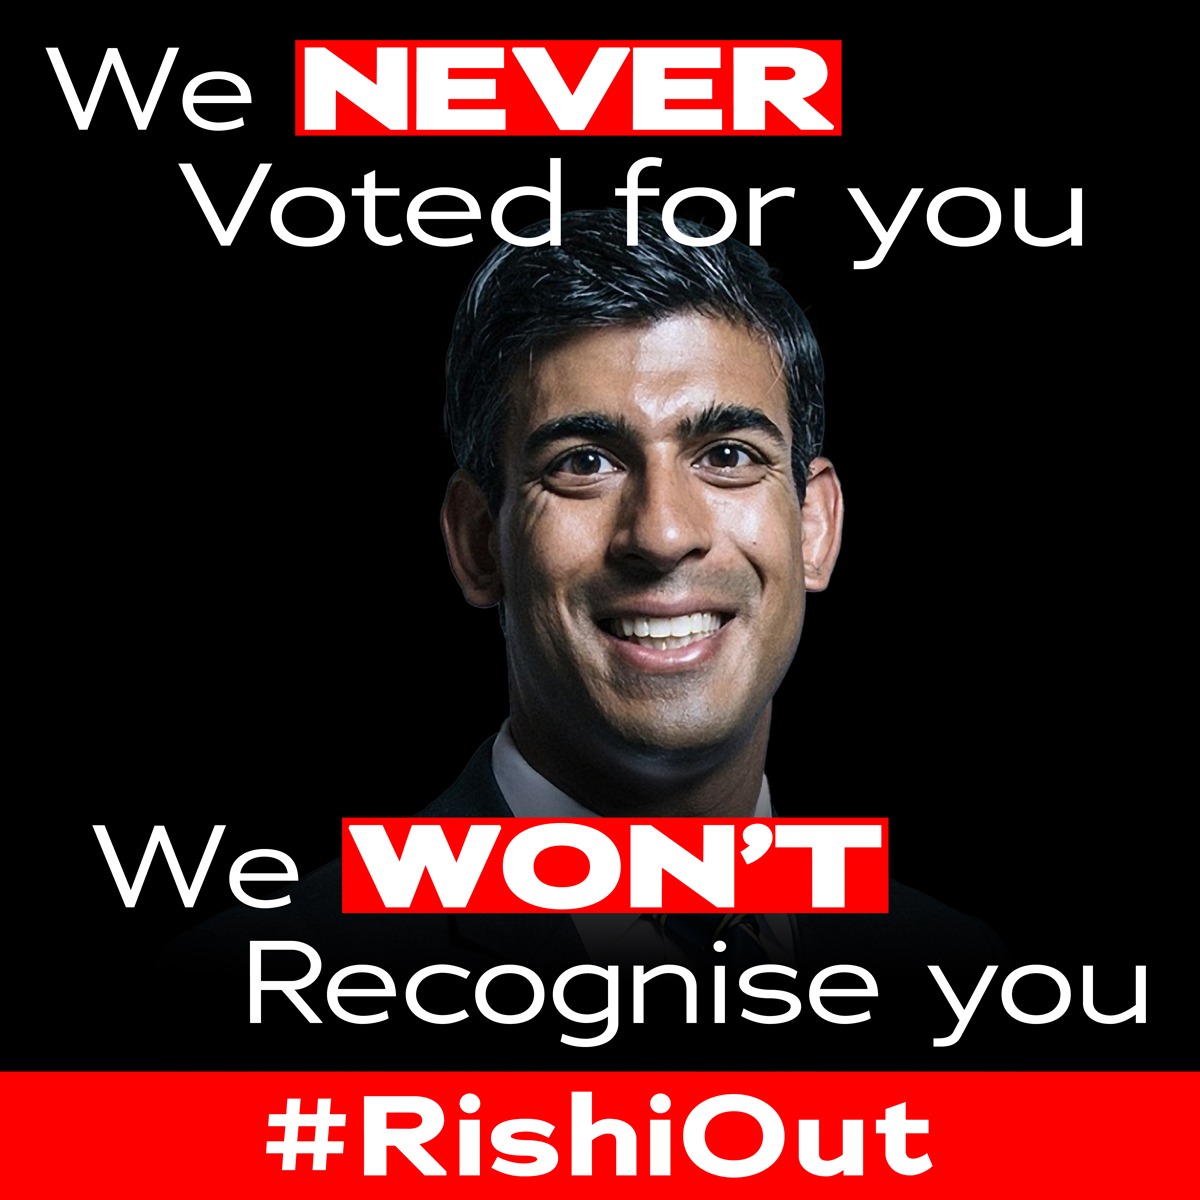 Hi @ChrisMasonBBC @BBCVickiYoung @Peston @AnushkaAsthana @ShehabKhan

Stop referring to the horrid charlatan @RishiSunak as our Prime Minister as he is not wanted, and the Country did not elect him

#SunakOut #ToriesOut #NotInMyName #GeneralElectionNow
twitter.com/implausibleblo…